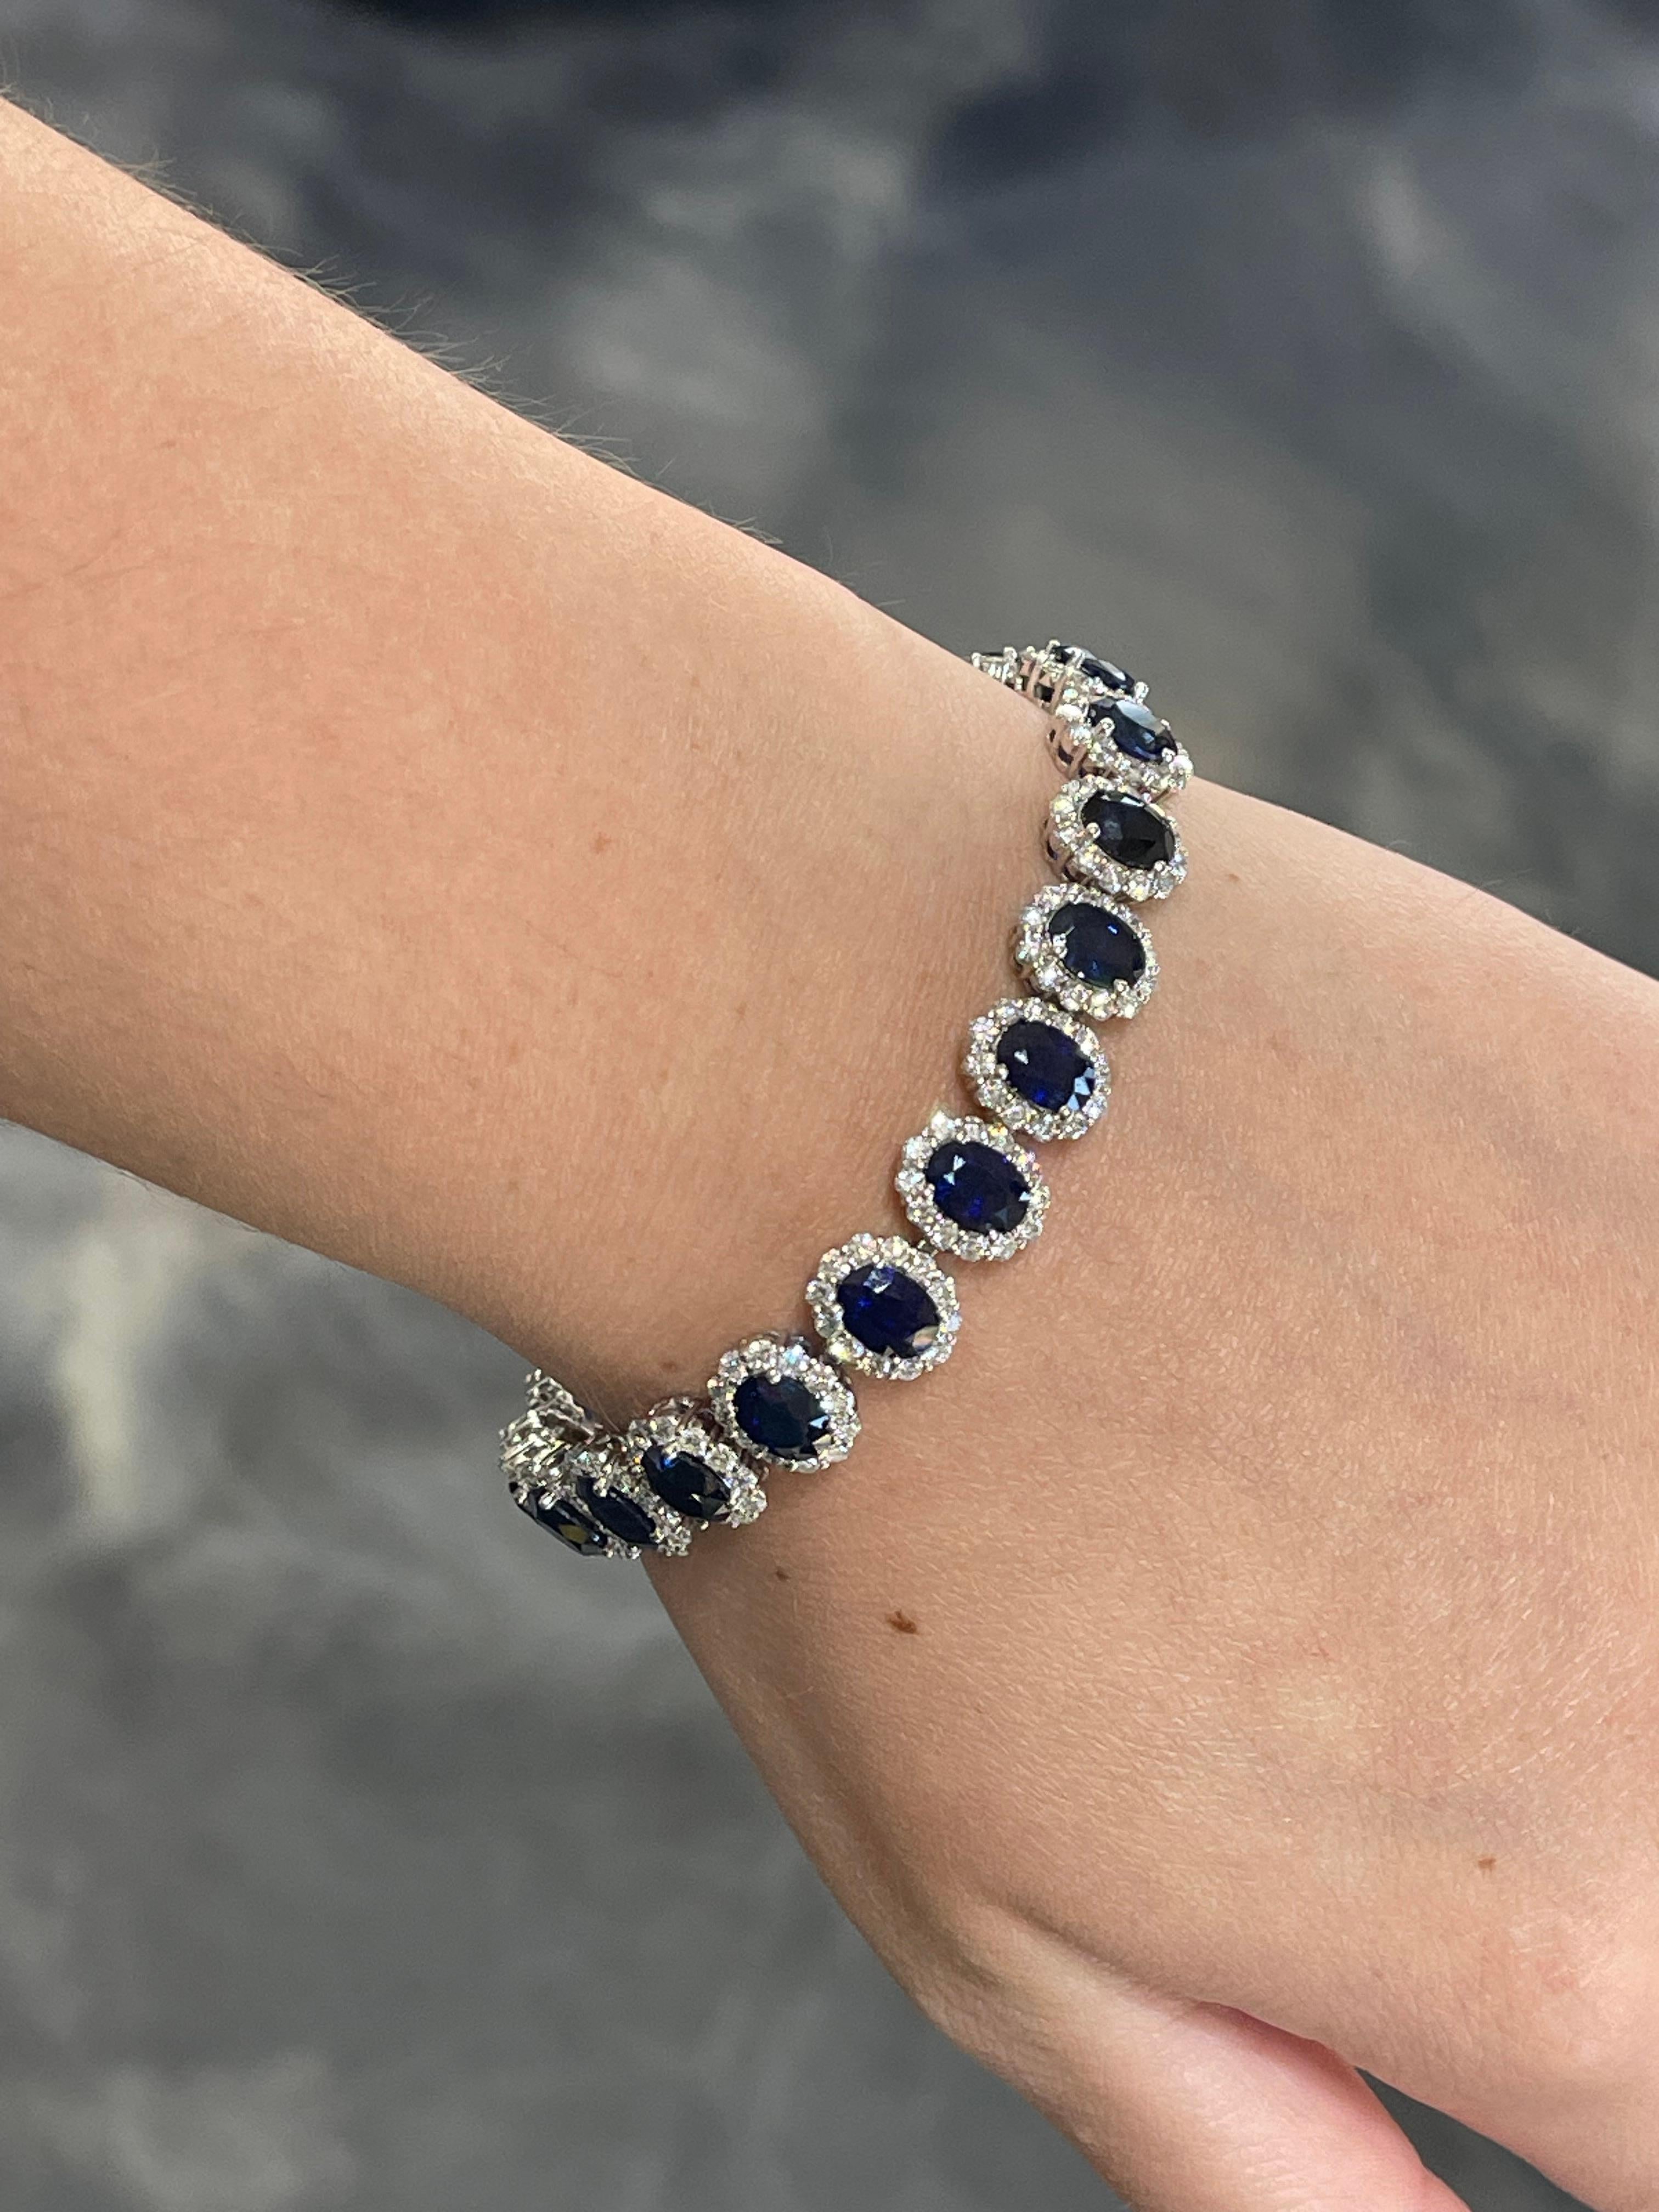 14K WG 22ct Blue Sapphire and 7ct Diamond Halo Bracelet In Excellent Condition For Sale In Stuart, FL